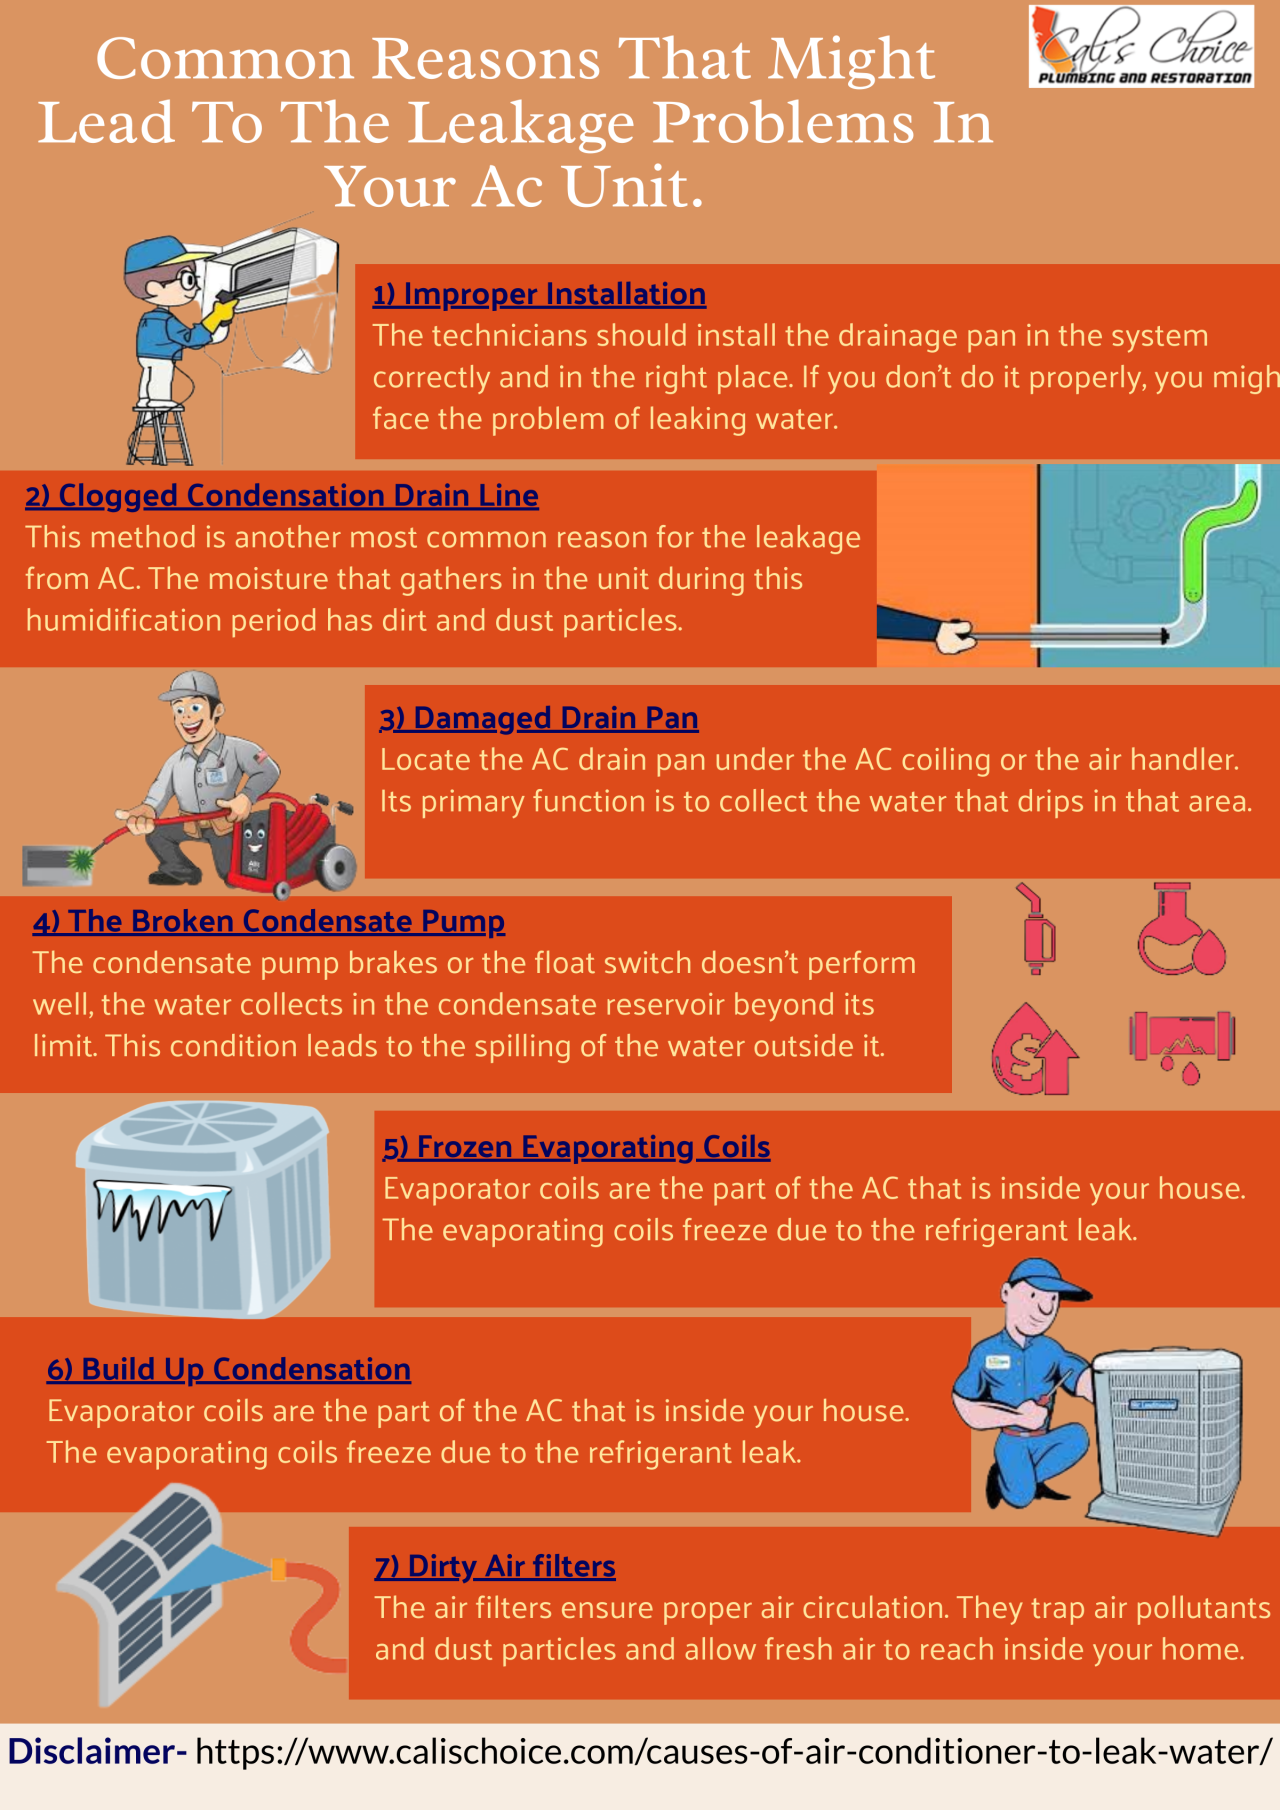 Common Reasons That Might Lead To The Leakage Problems In Your Ac Unit